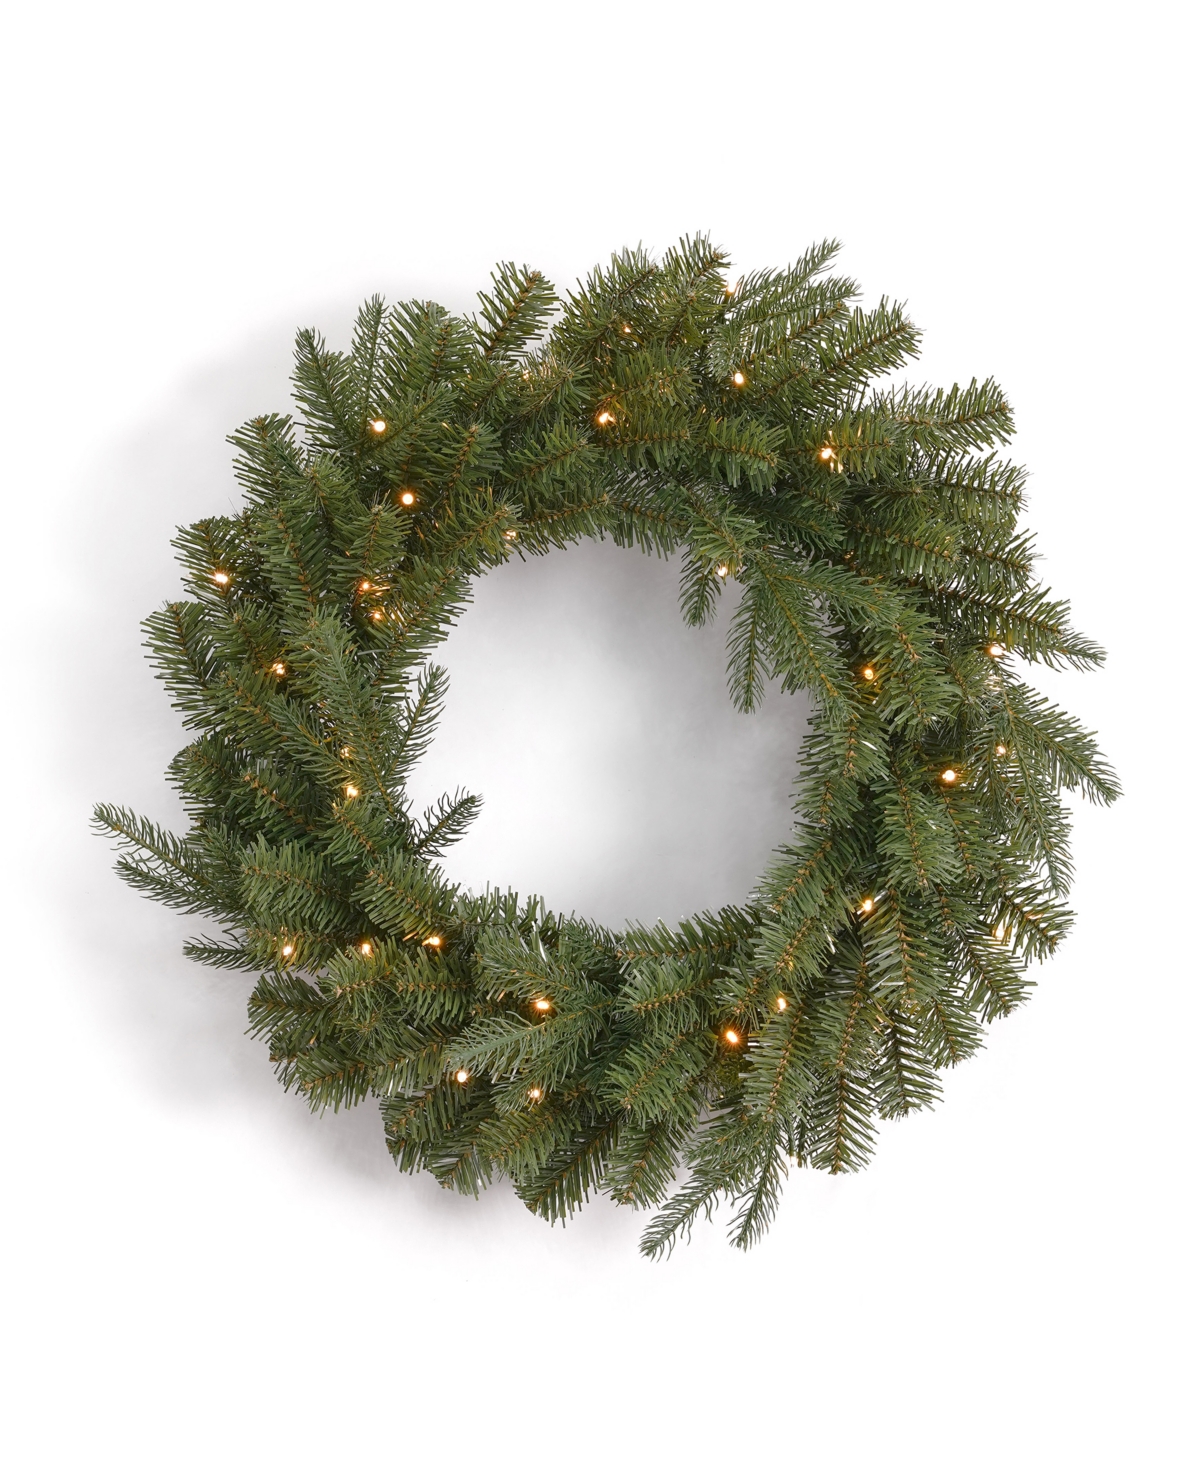 Valley Pine 3 Piece Door Kit, 24" Pre-Lit Pe, Pvc Wreath 26' Garlands, Battery Operated Led - Green